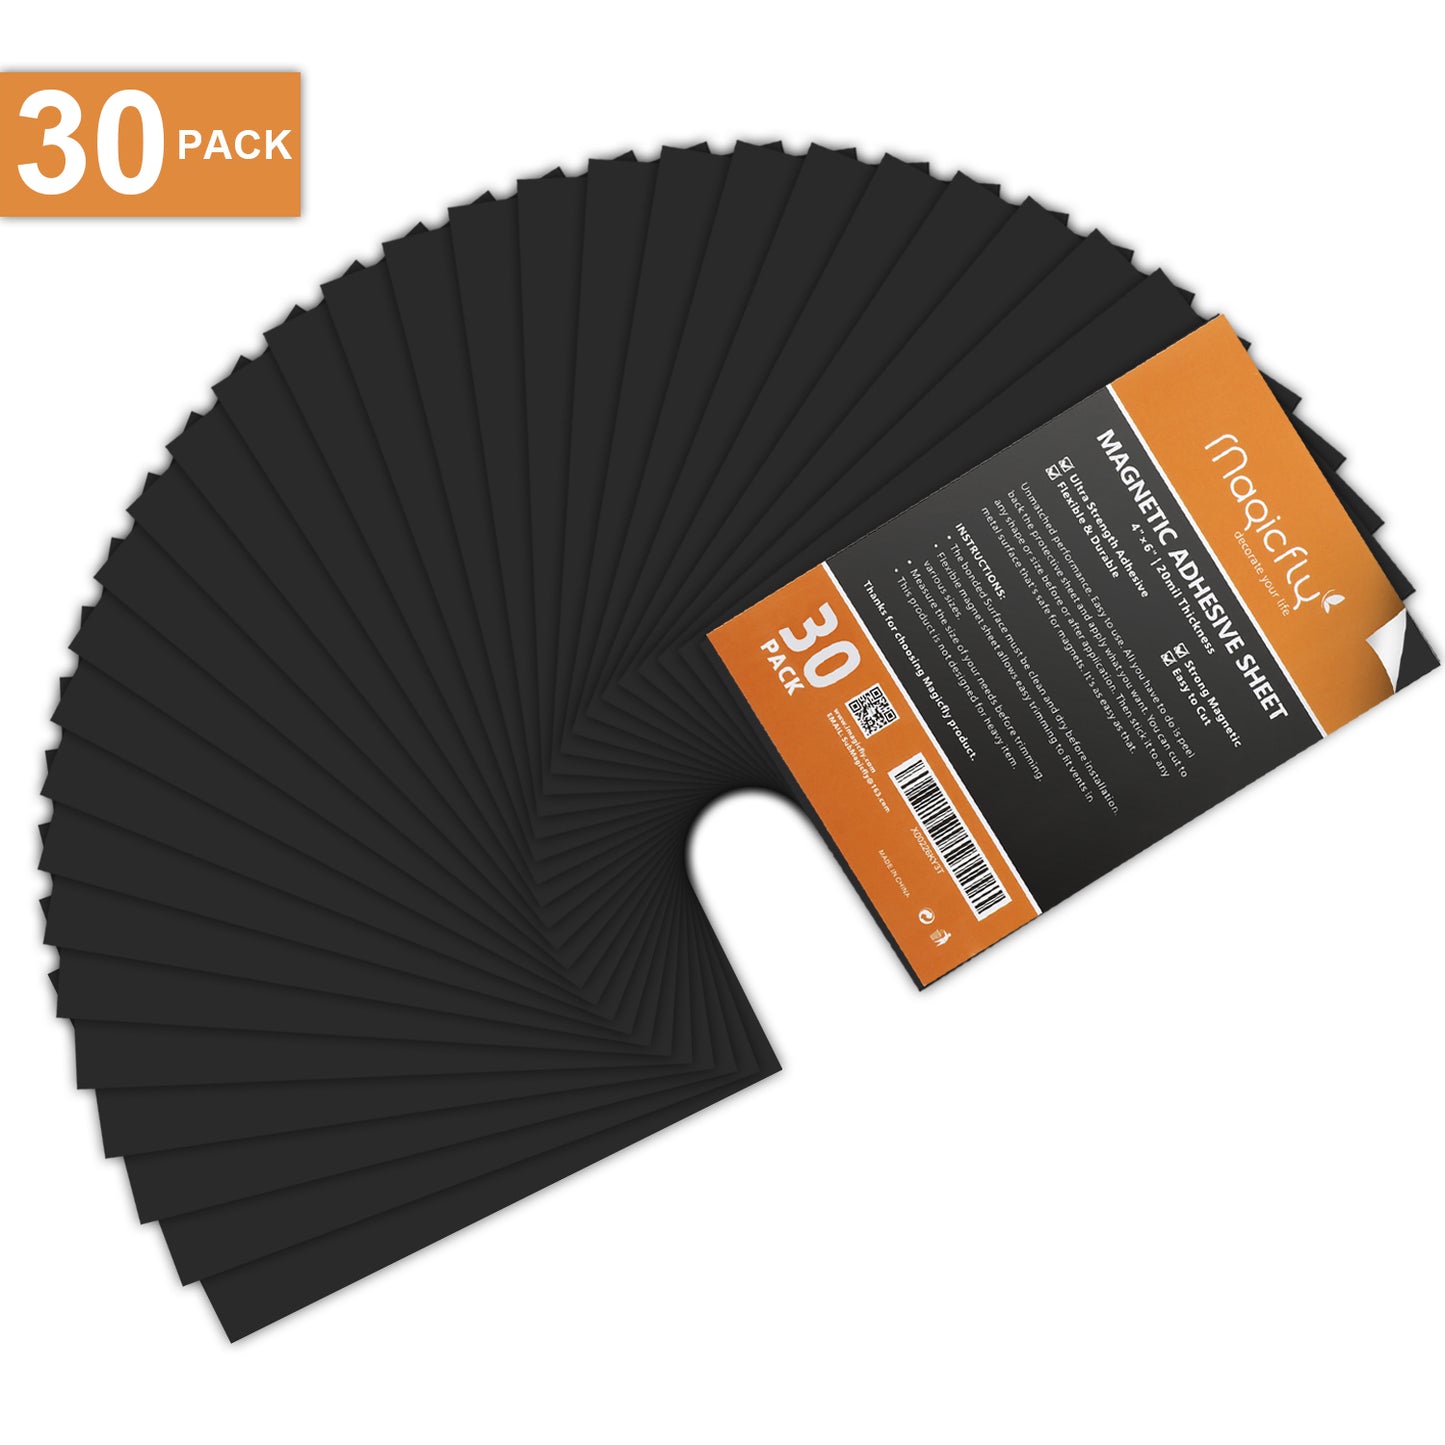 Magicfly Magnet Adhesive Sheets 8 Inch 15 Pack Flexible Magnetic